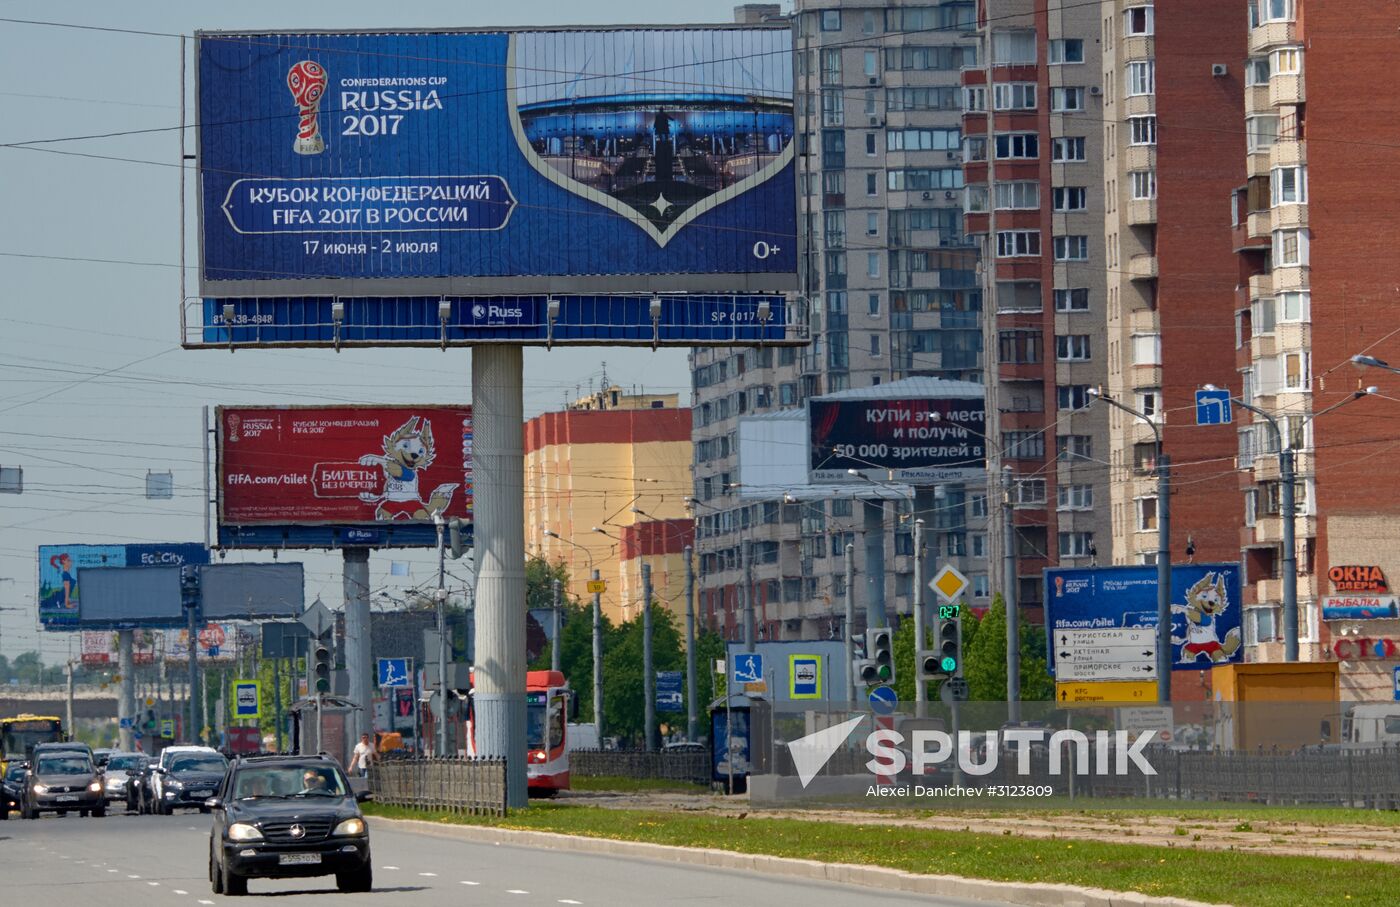 Preparations for 2017 FIFA Confederations Cup in St. Petersburg